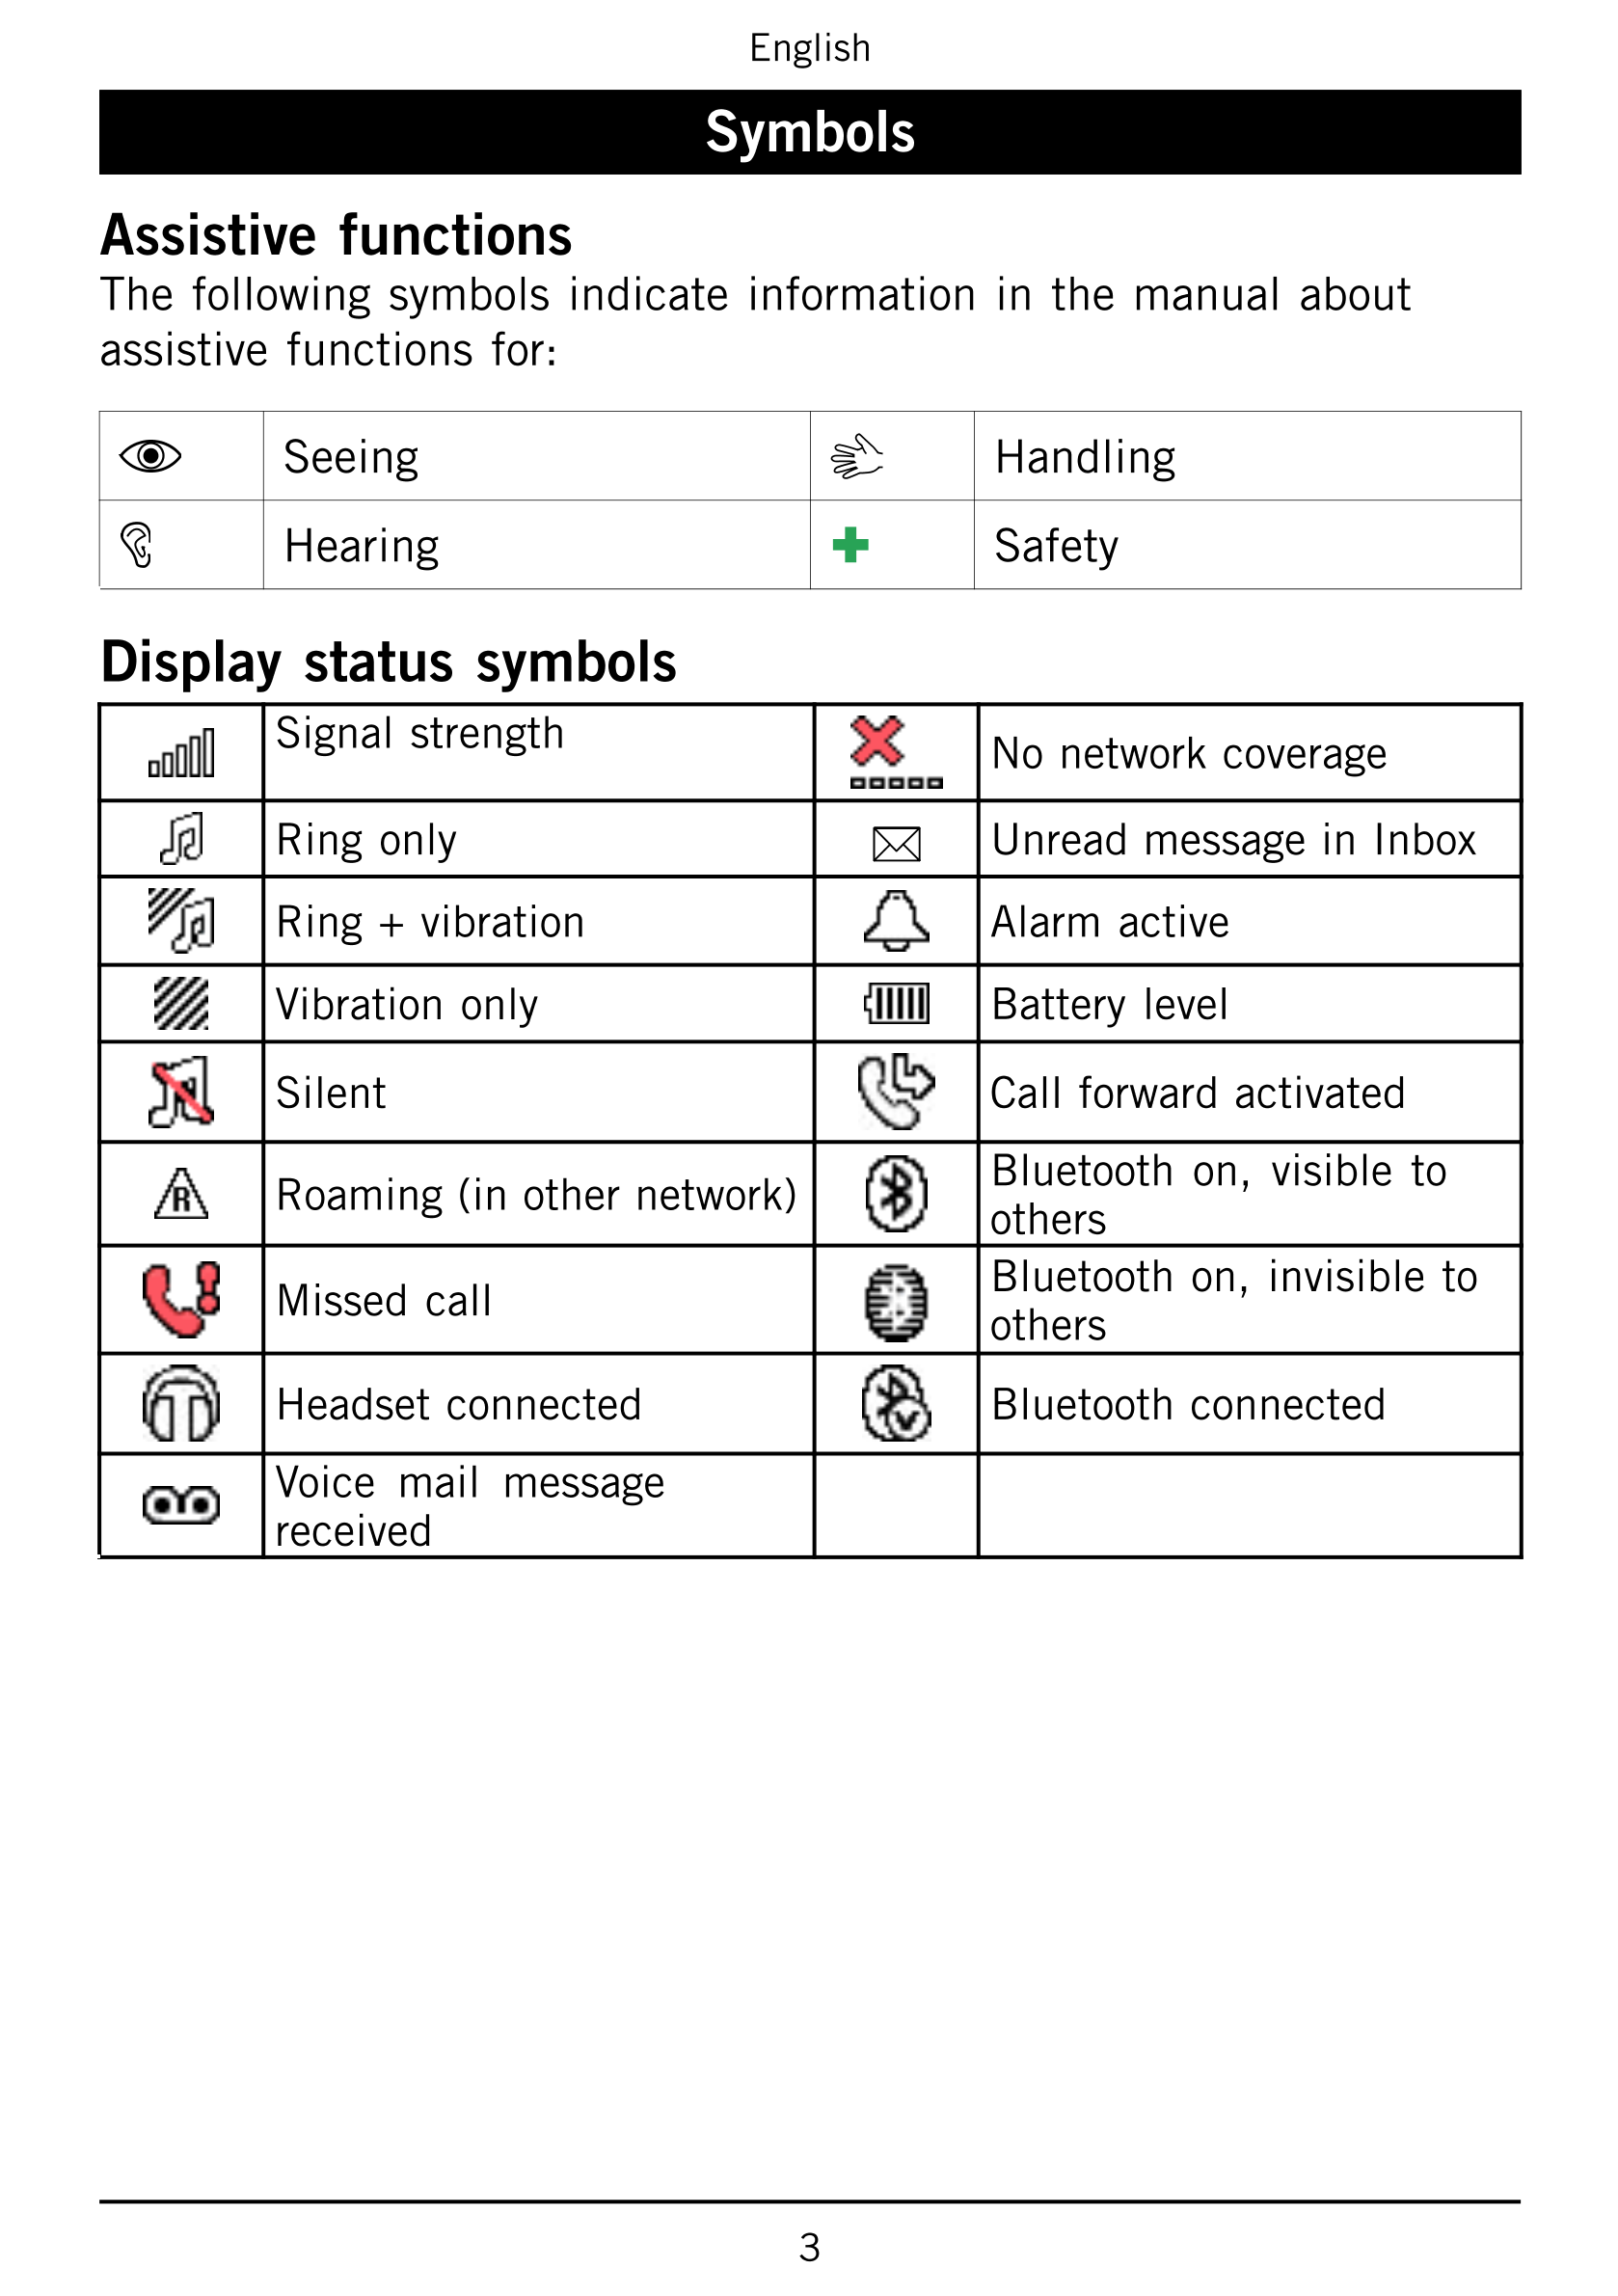 English
Symbols
Assistive functions
The following symbols indicate information in the manual about
assistive functions for:
Seei